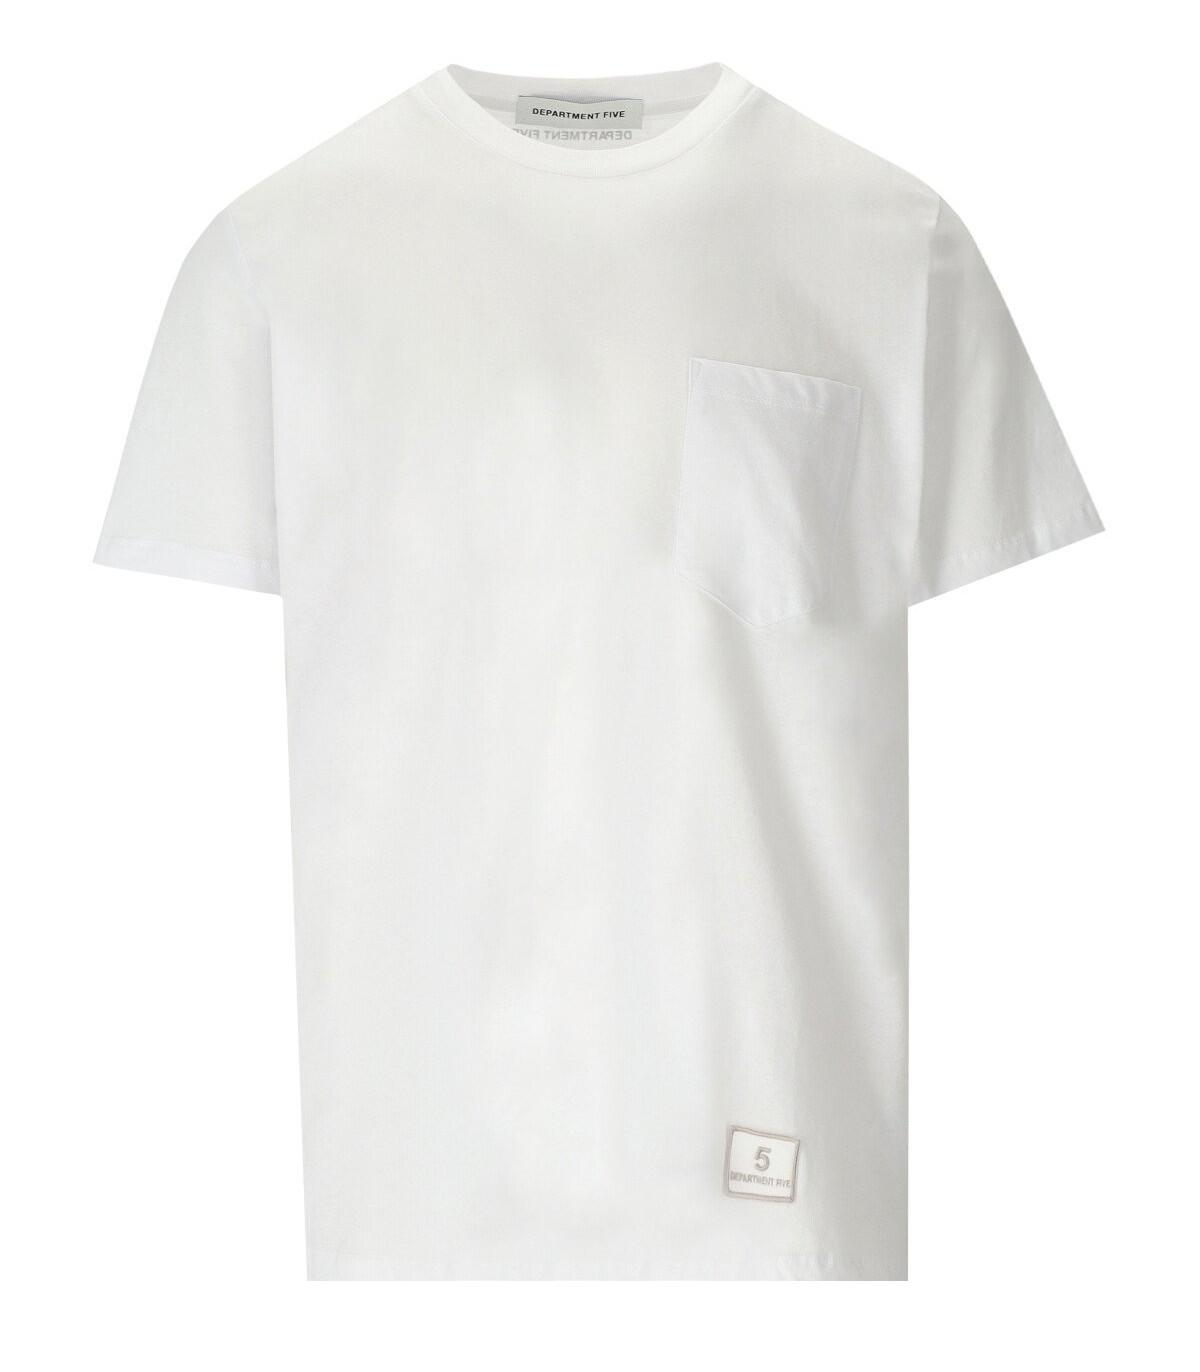 Department 5 Martin T-shirt With Pocket in White for Men | Lyst